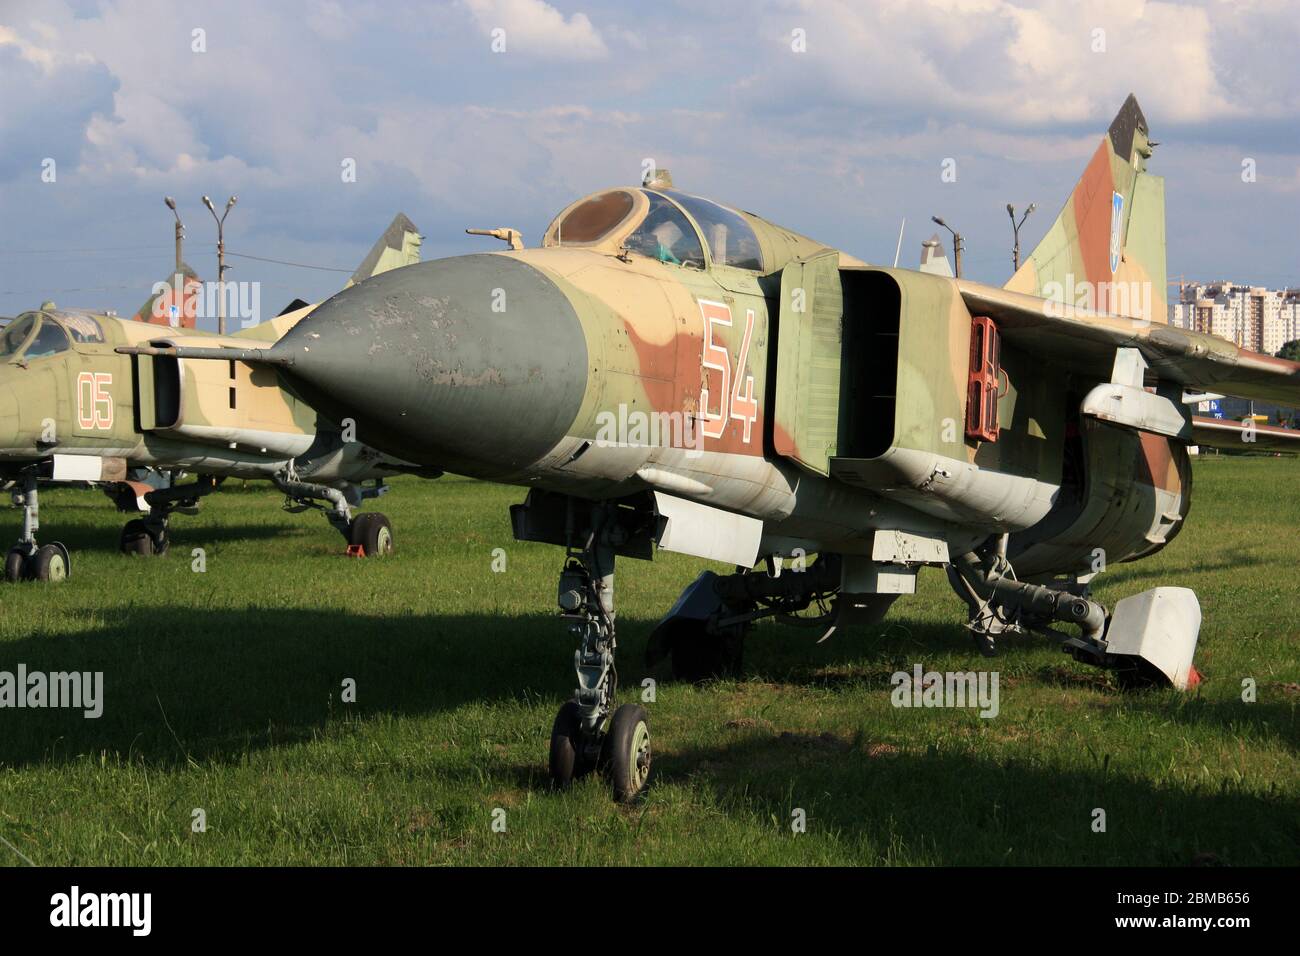 Exterior view of a Mikoyan-Gurevich MiG-23 'Flogger' third-generation jet fighter aircraft at the Zhulyany State Aviation Museum of Ukraine Stock Photo